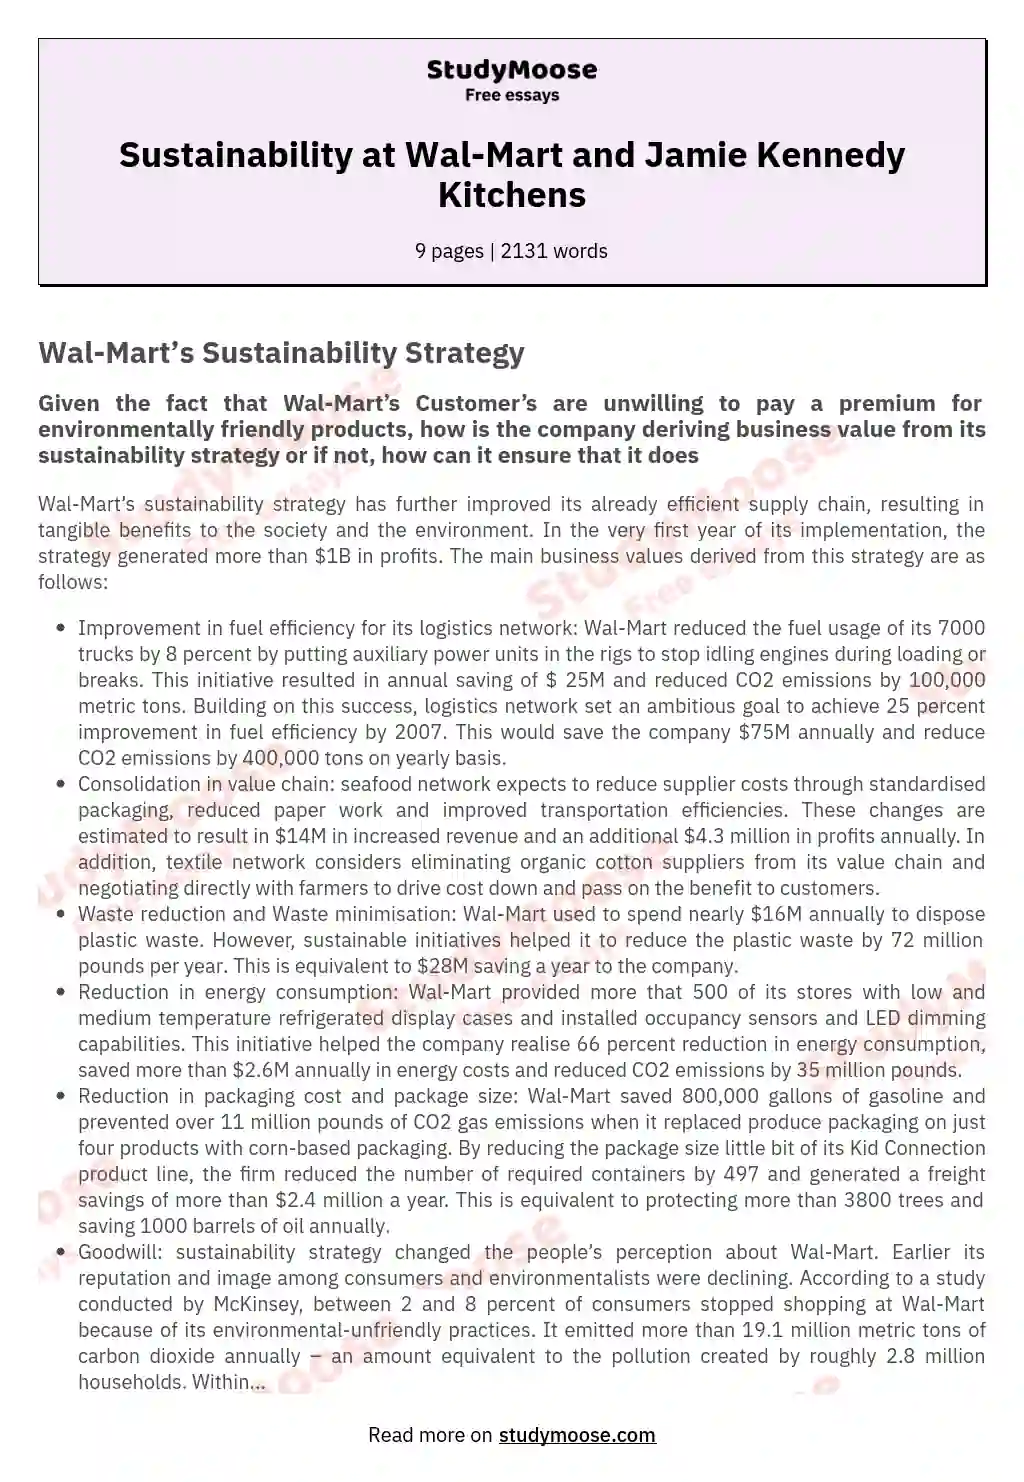 Sustainability at Wal-Mart and Jamie Kennedy Kitchens essay